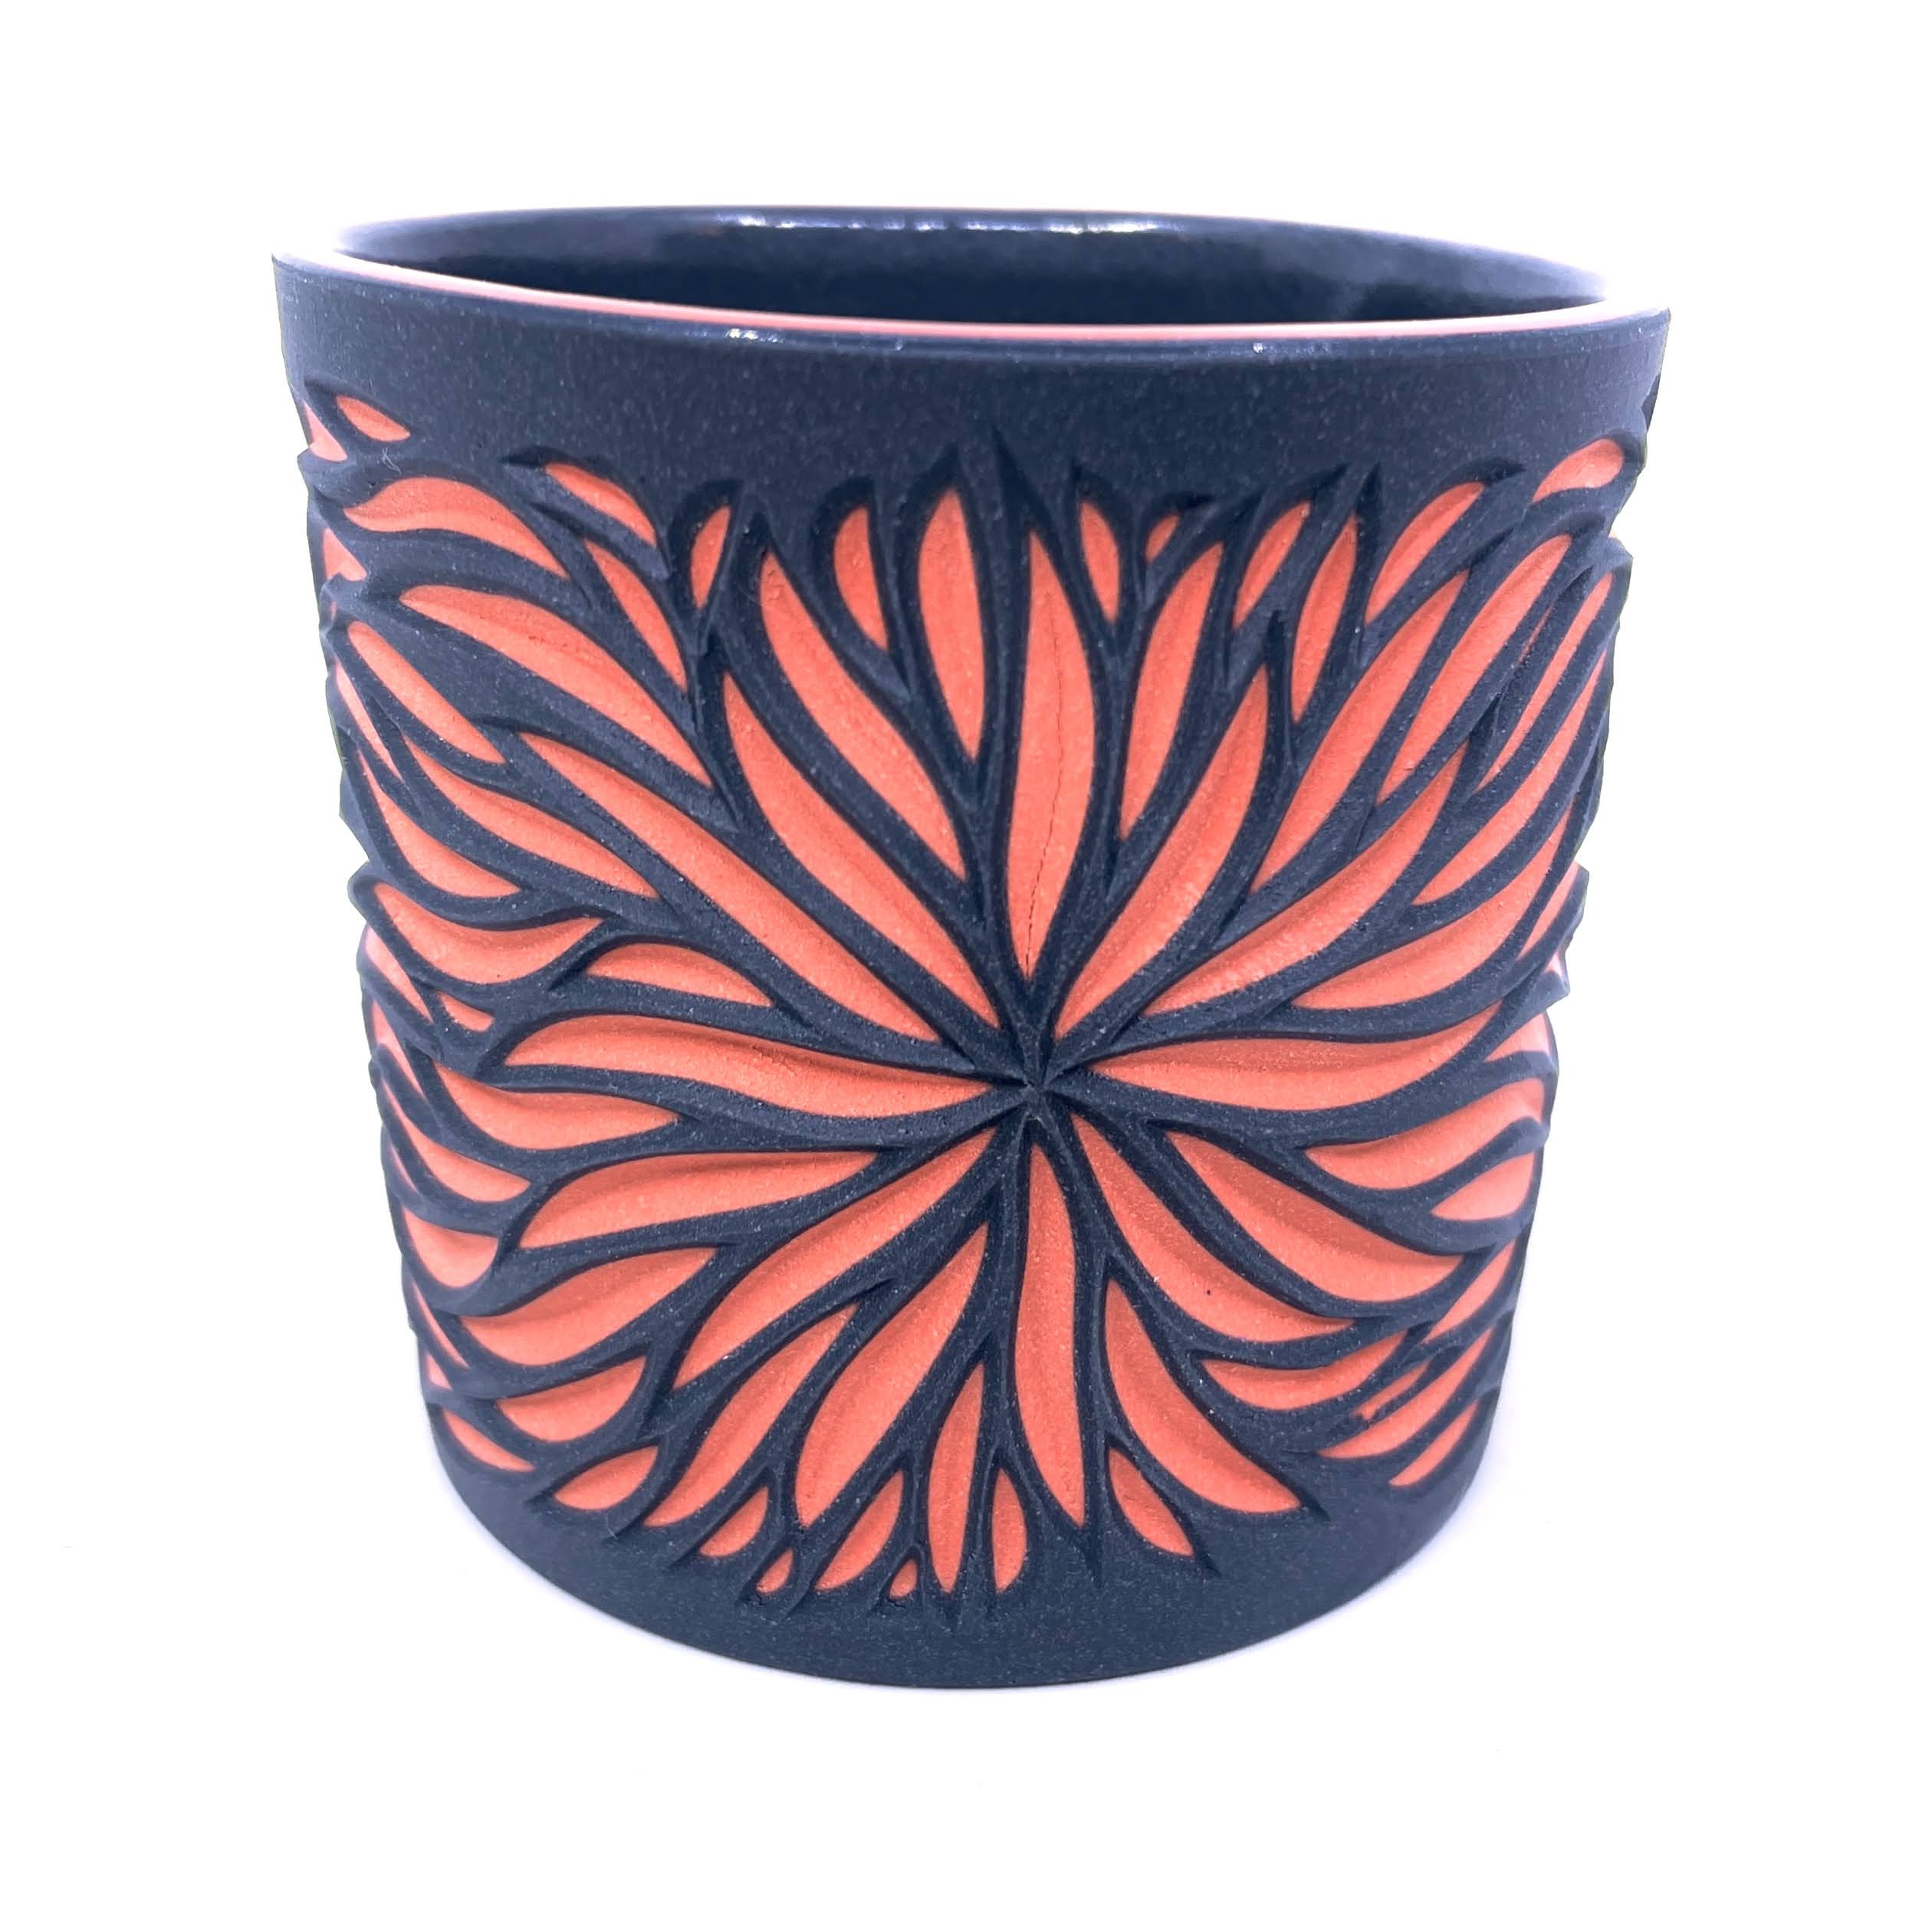 Black to Coral 2-Layer Starburst Tumbler *Limited Preorder* (ships in 4-6 weeks)